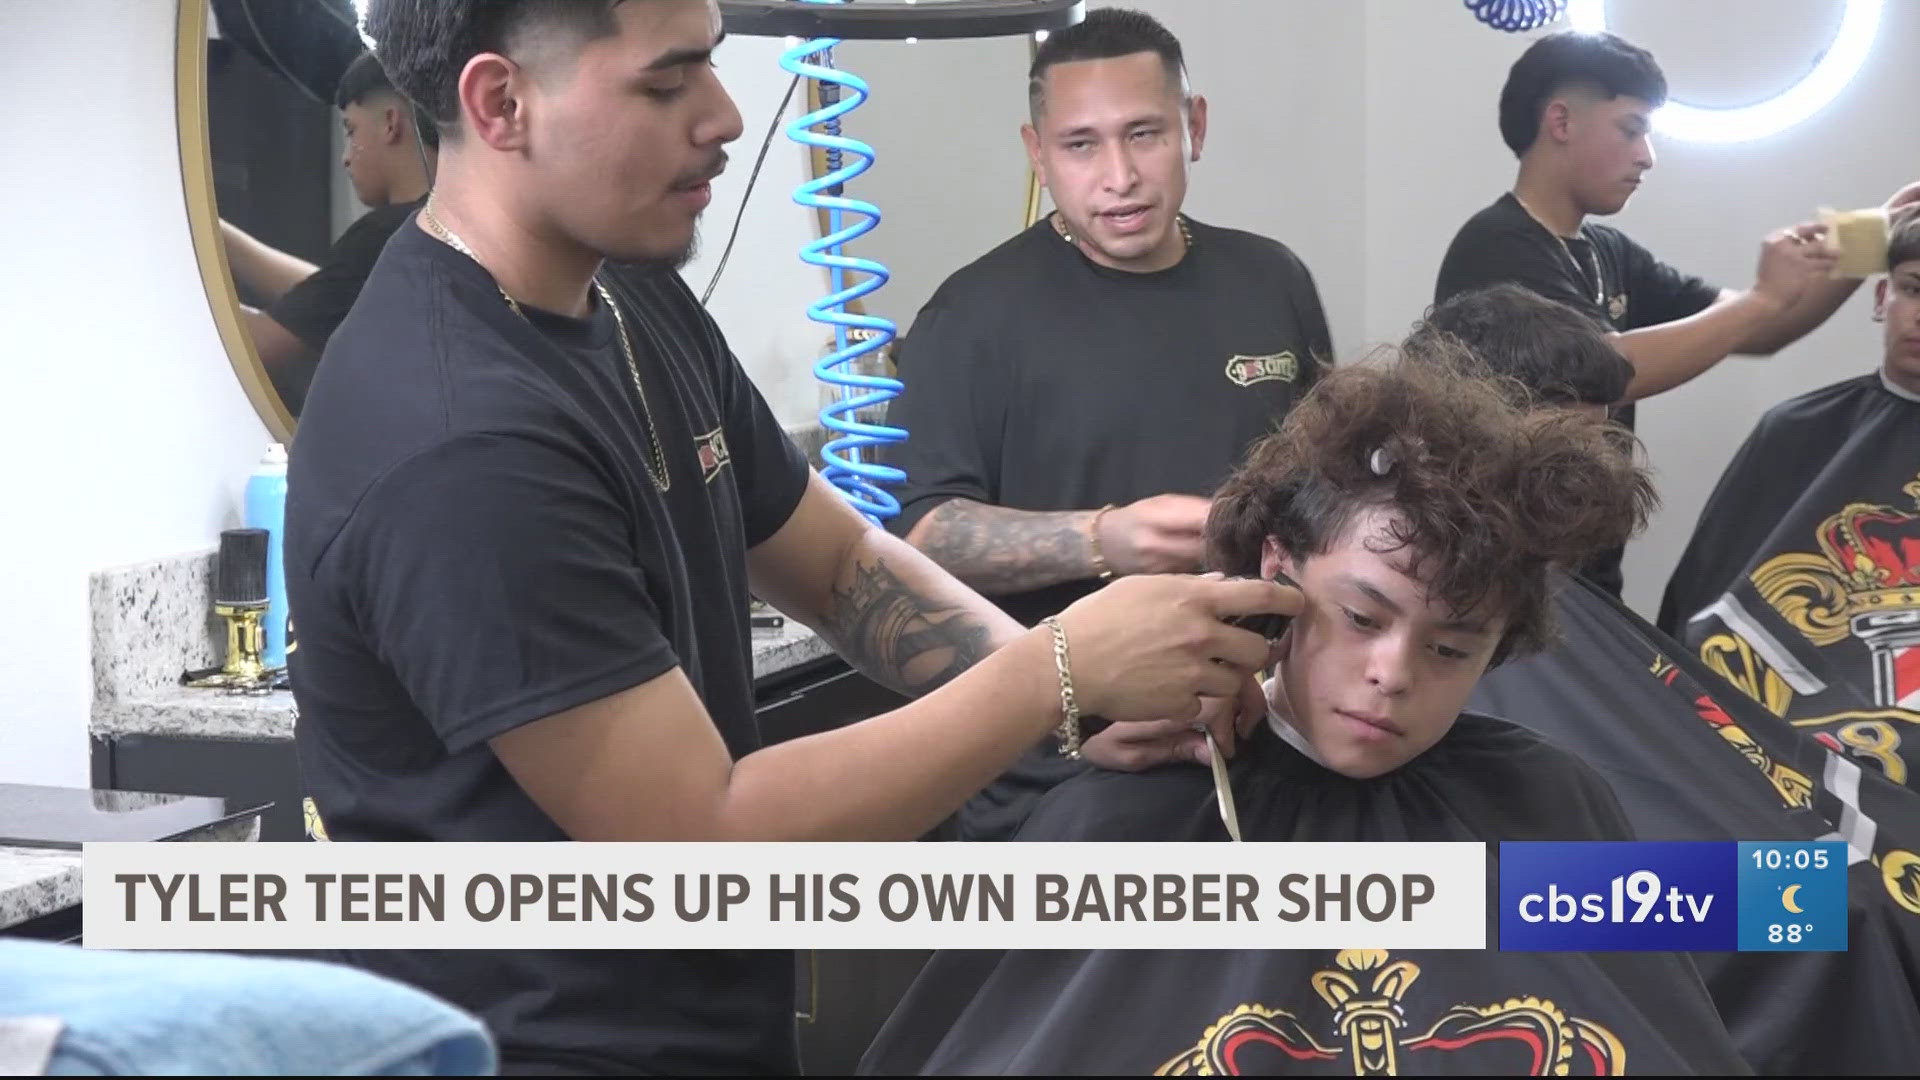 Antonio Medina, 17,  turned his dreams into reality Sunday, opening his own barber shop in Tyler.